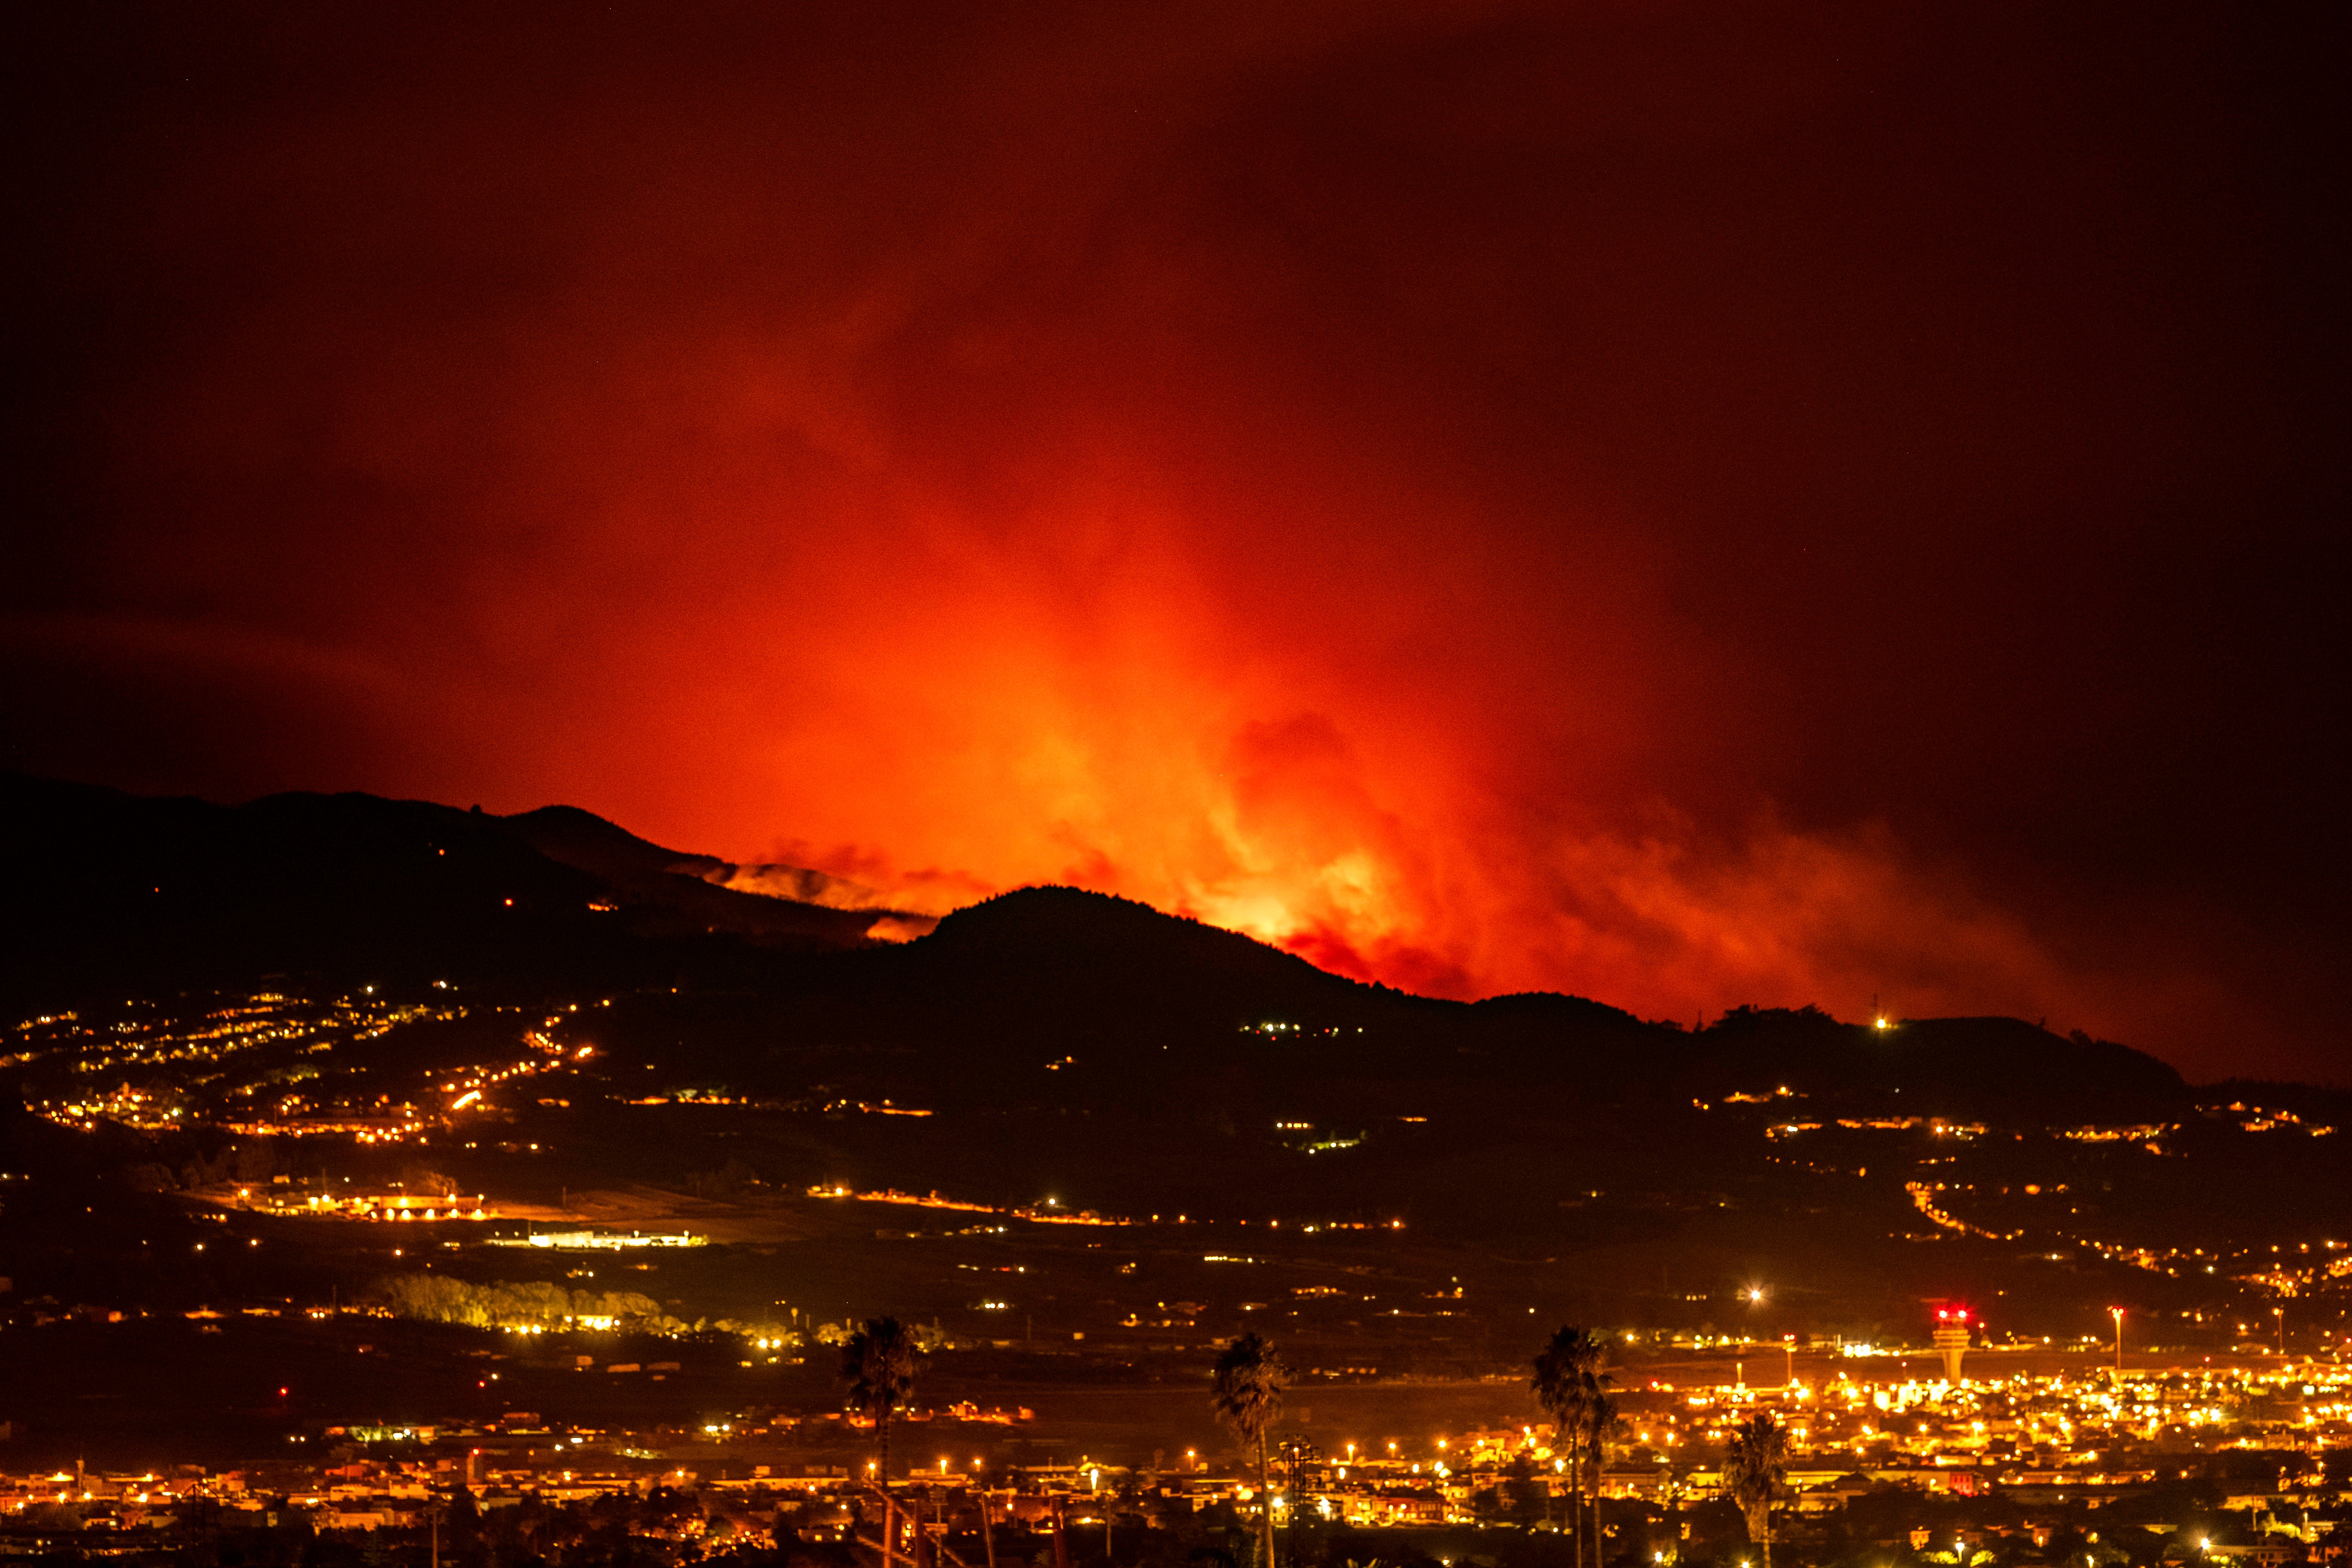 Flares are seen on the horizon as the fire advances through the forest toward the town of La Laguna and Los Rodeos airport in Tenerife on Saturday